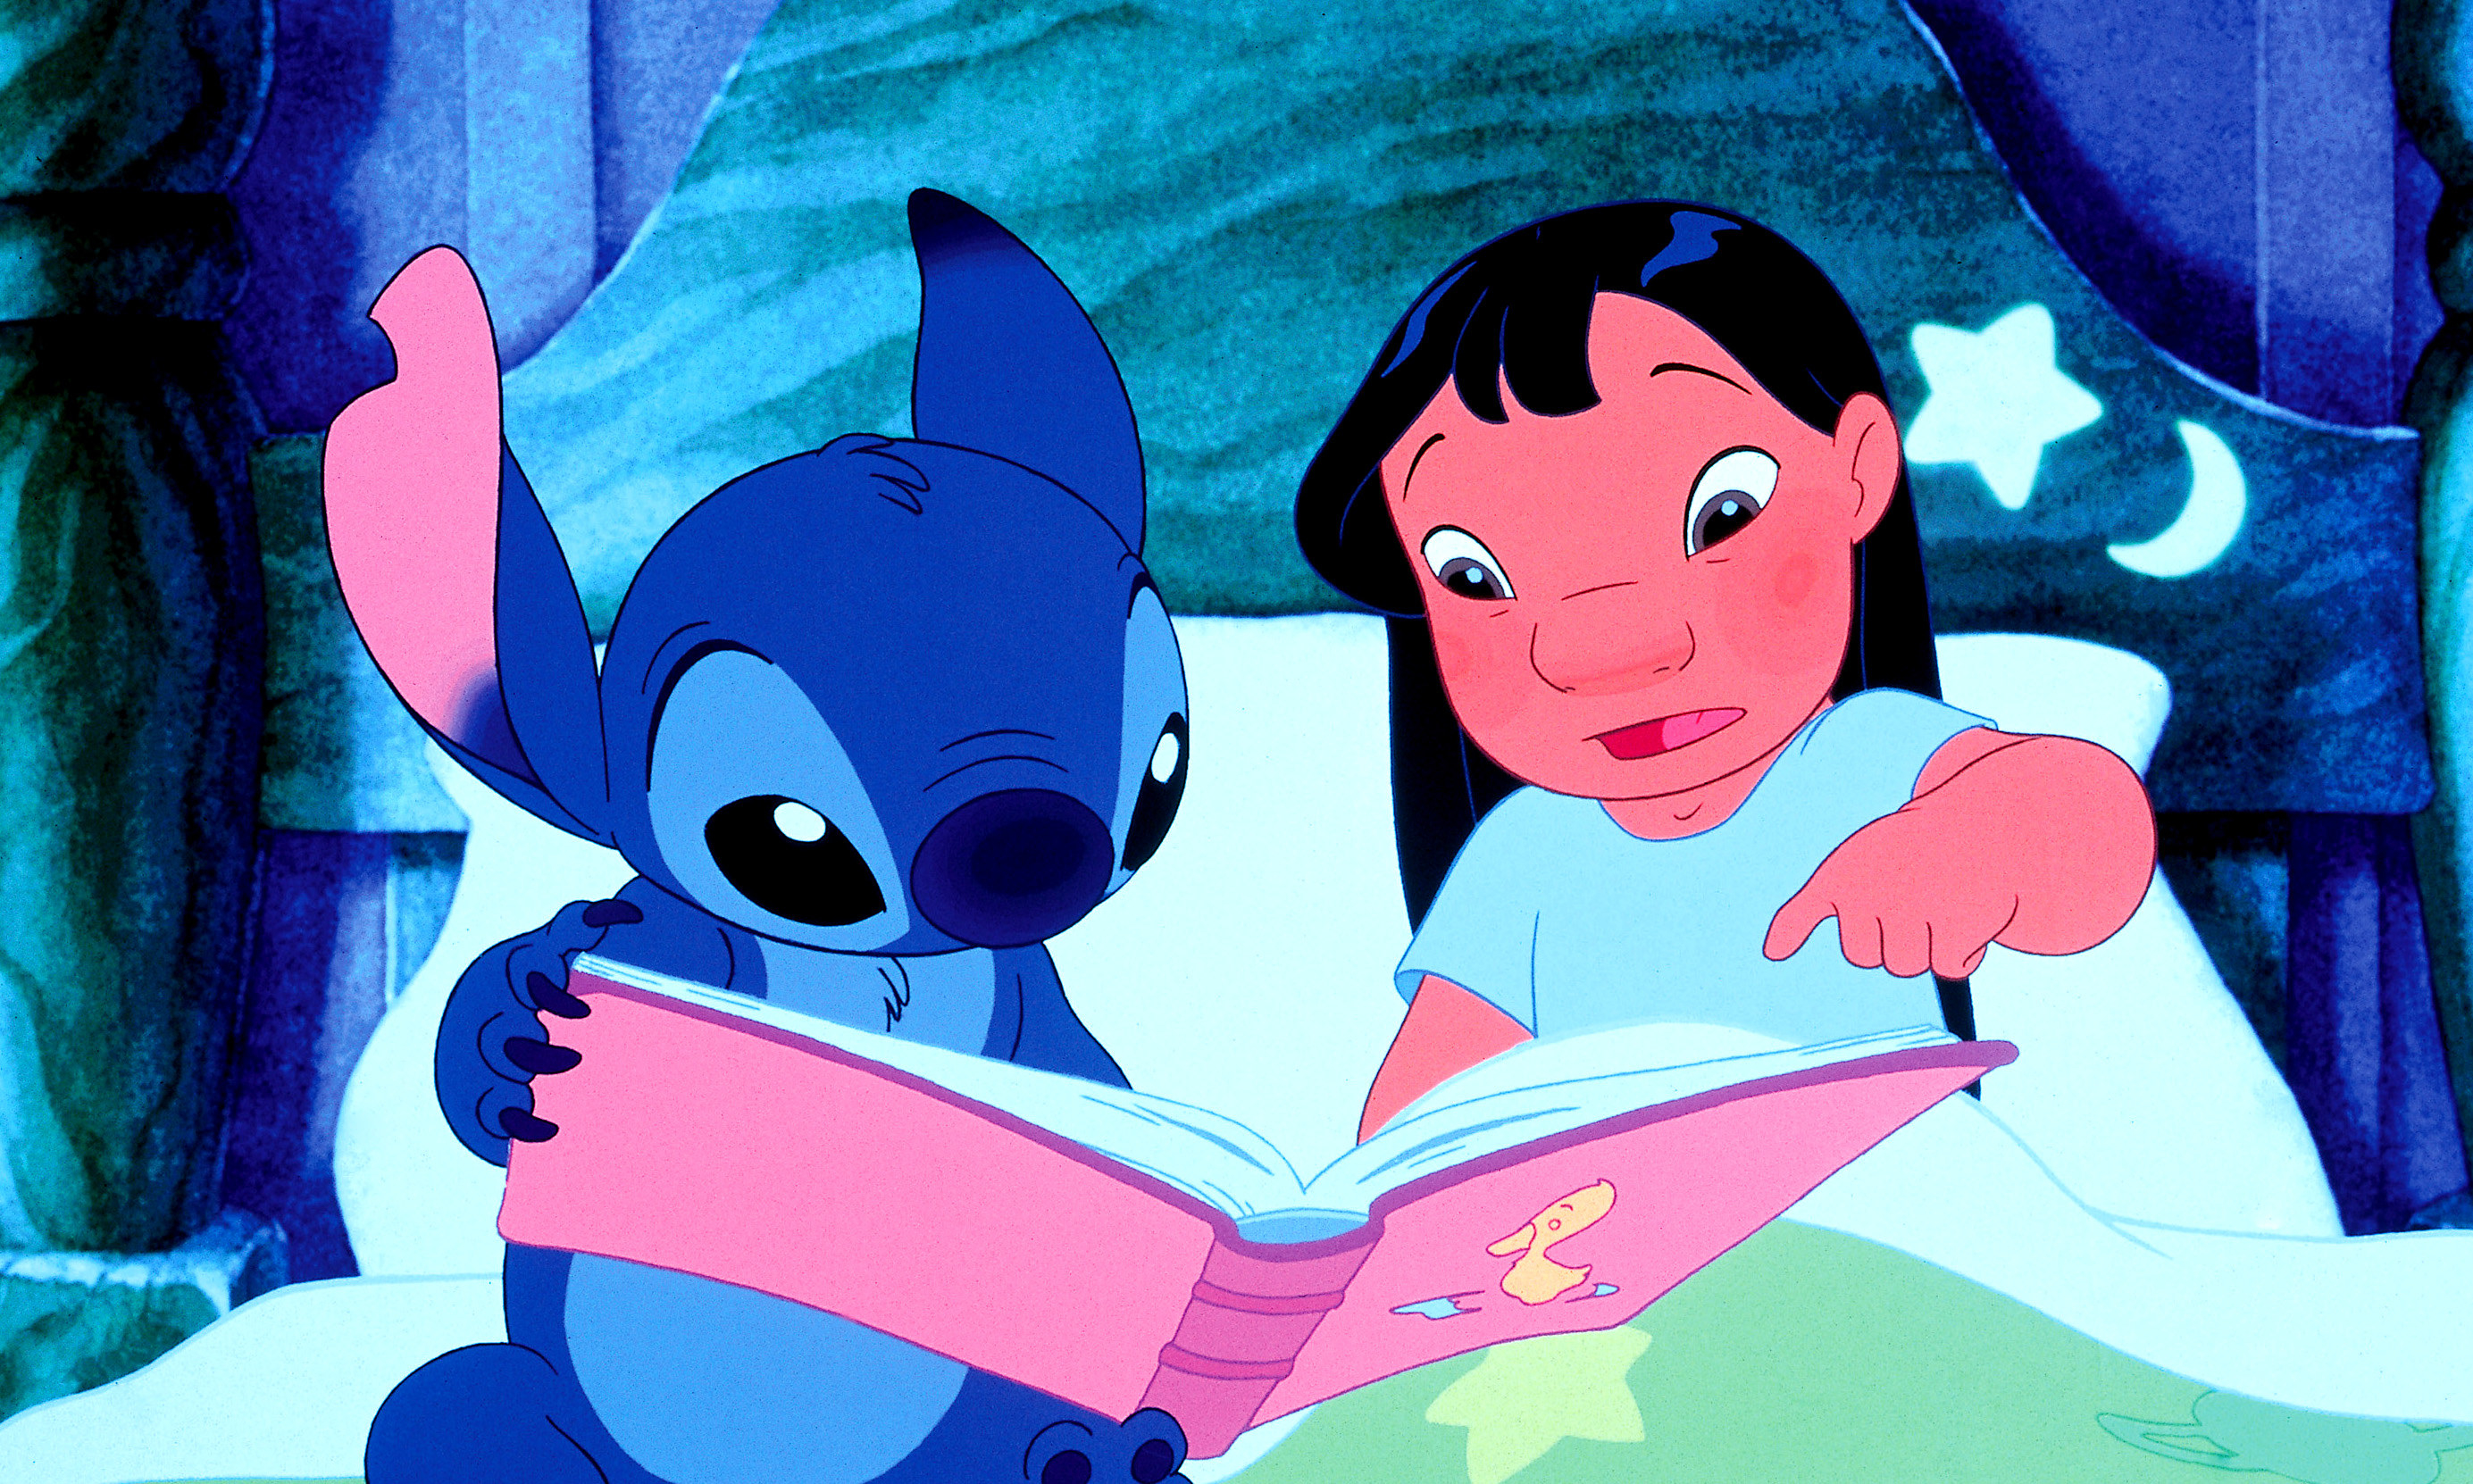 Lilo and Stitch reading a book together